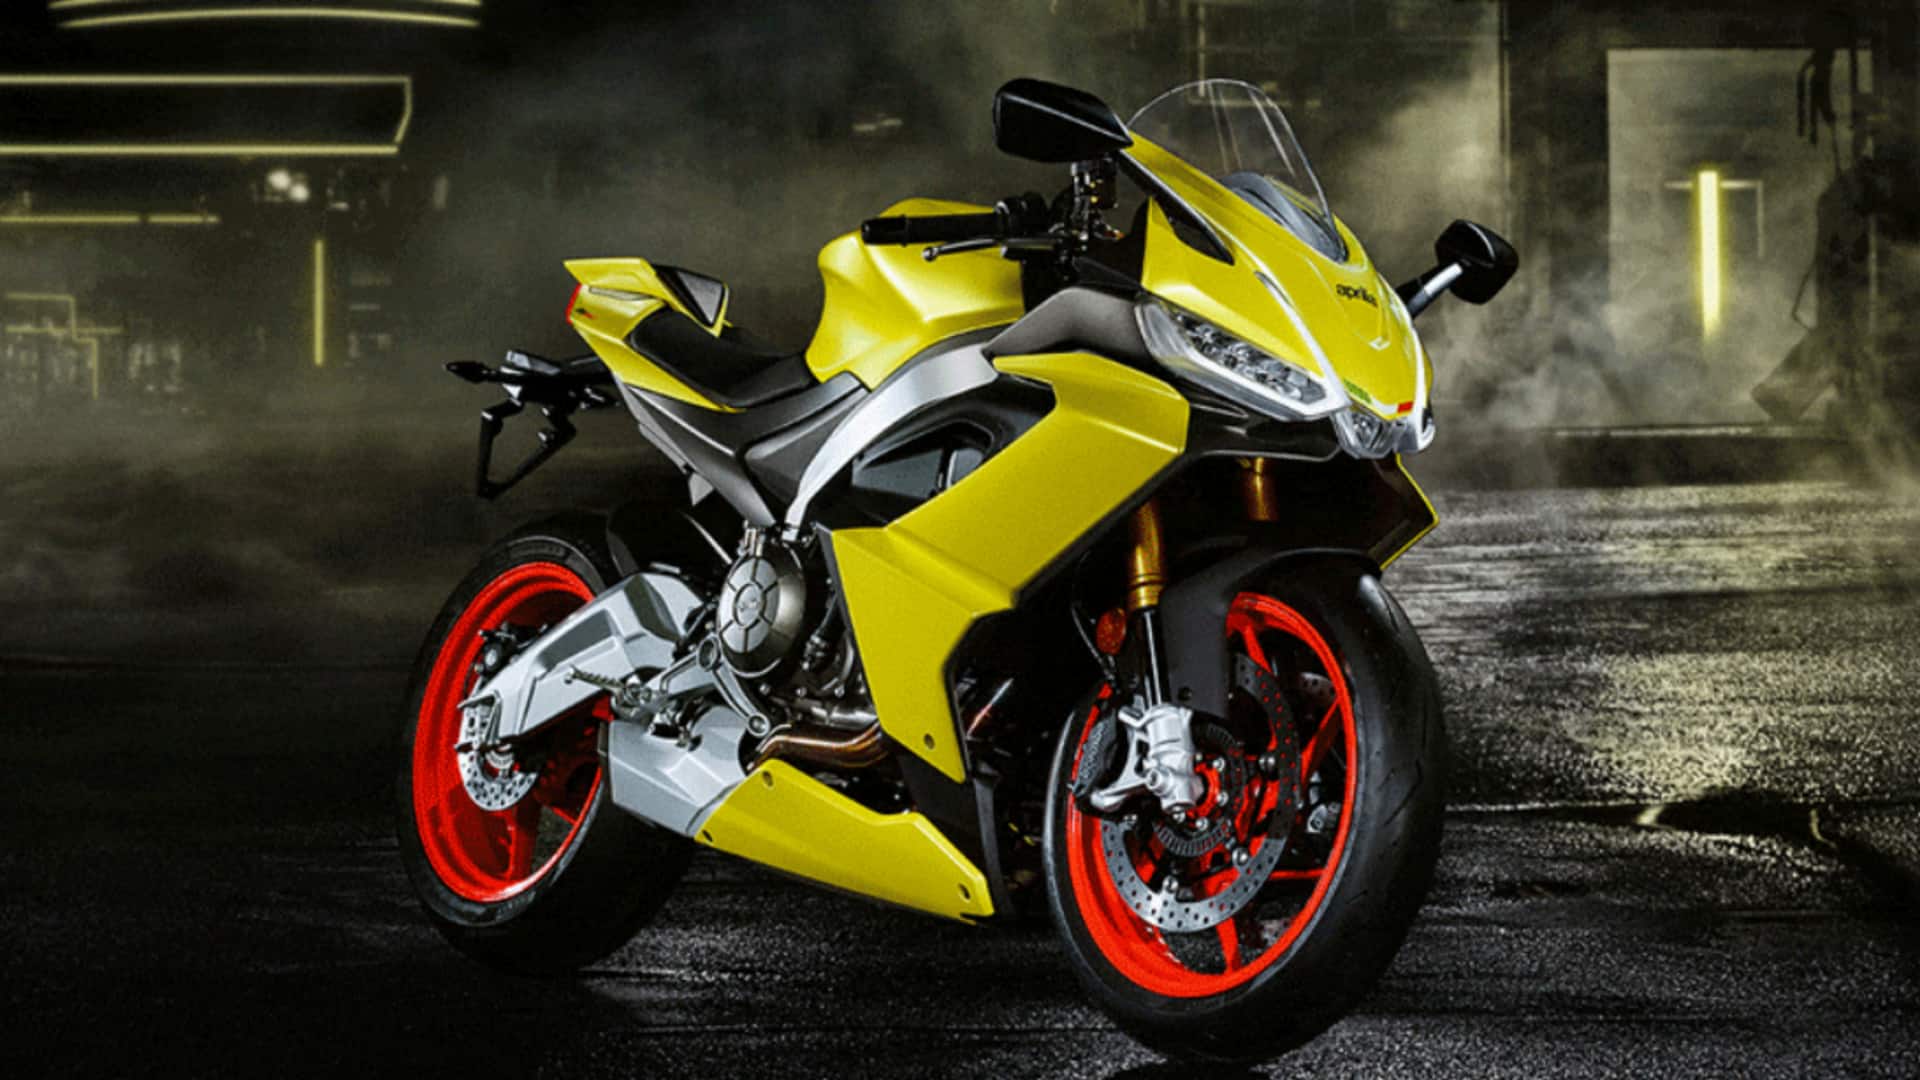 Aprilia's entry-level RS 440 motorcycle to debut on September 7